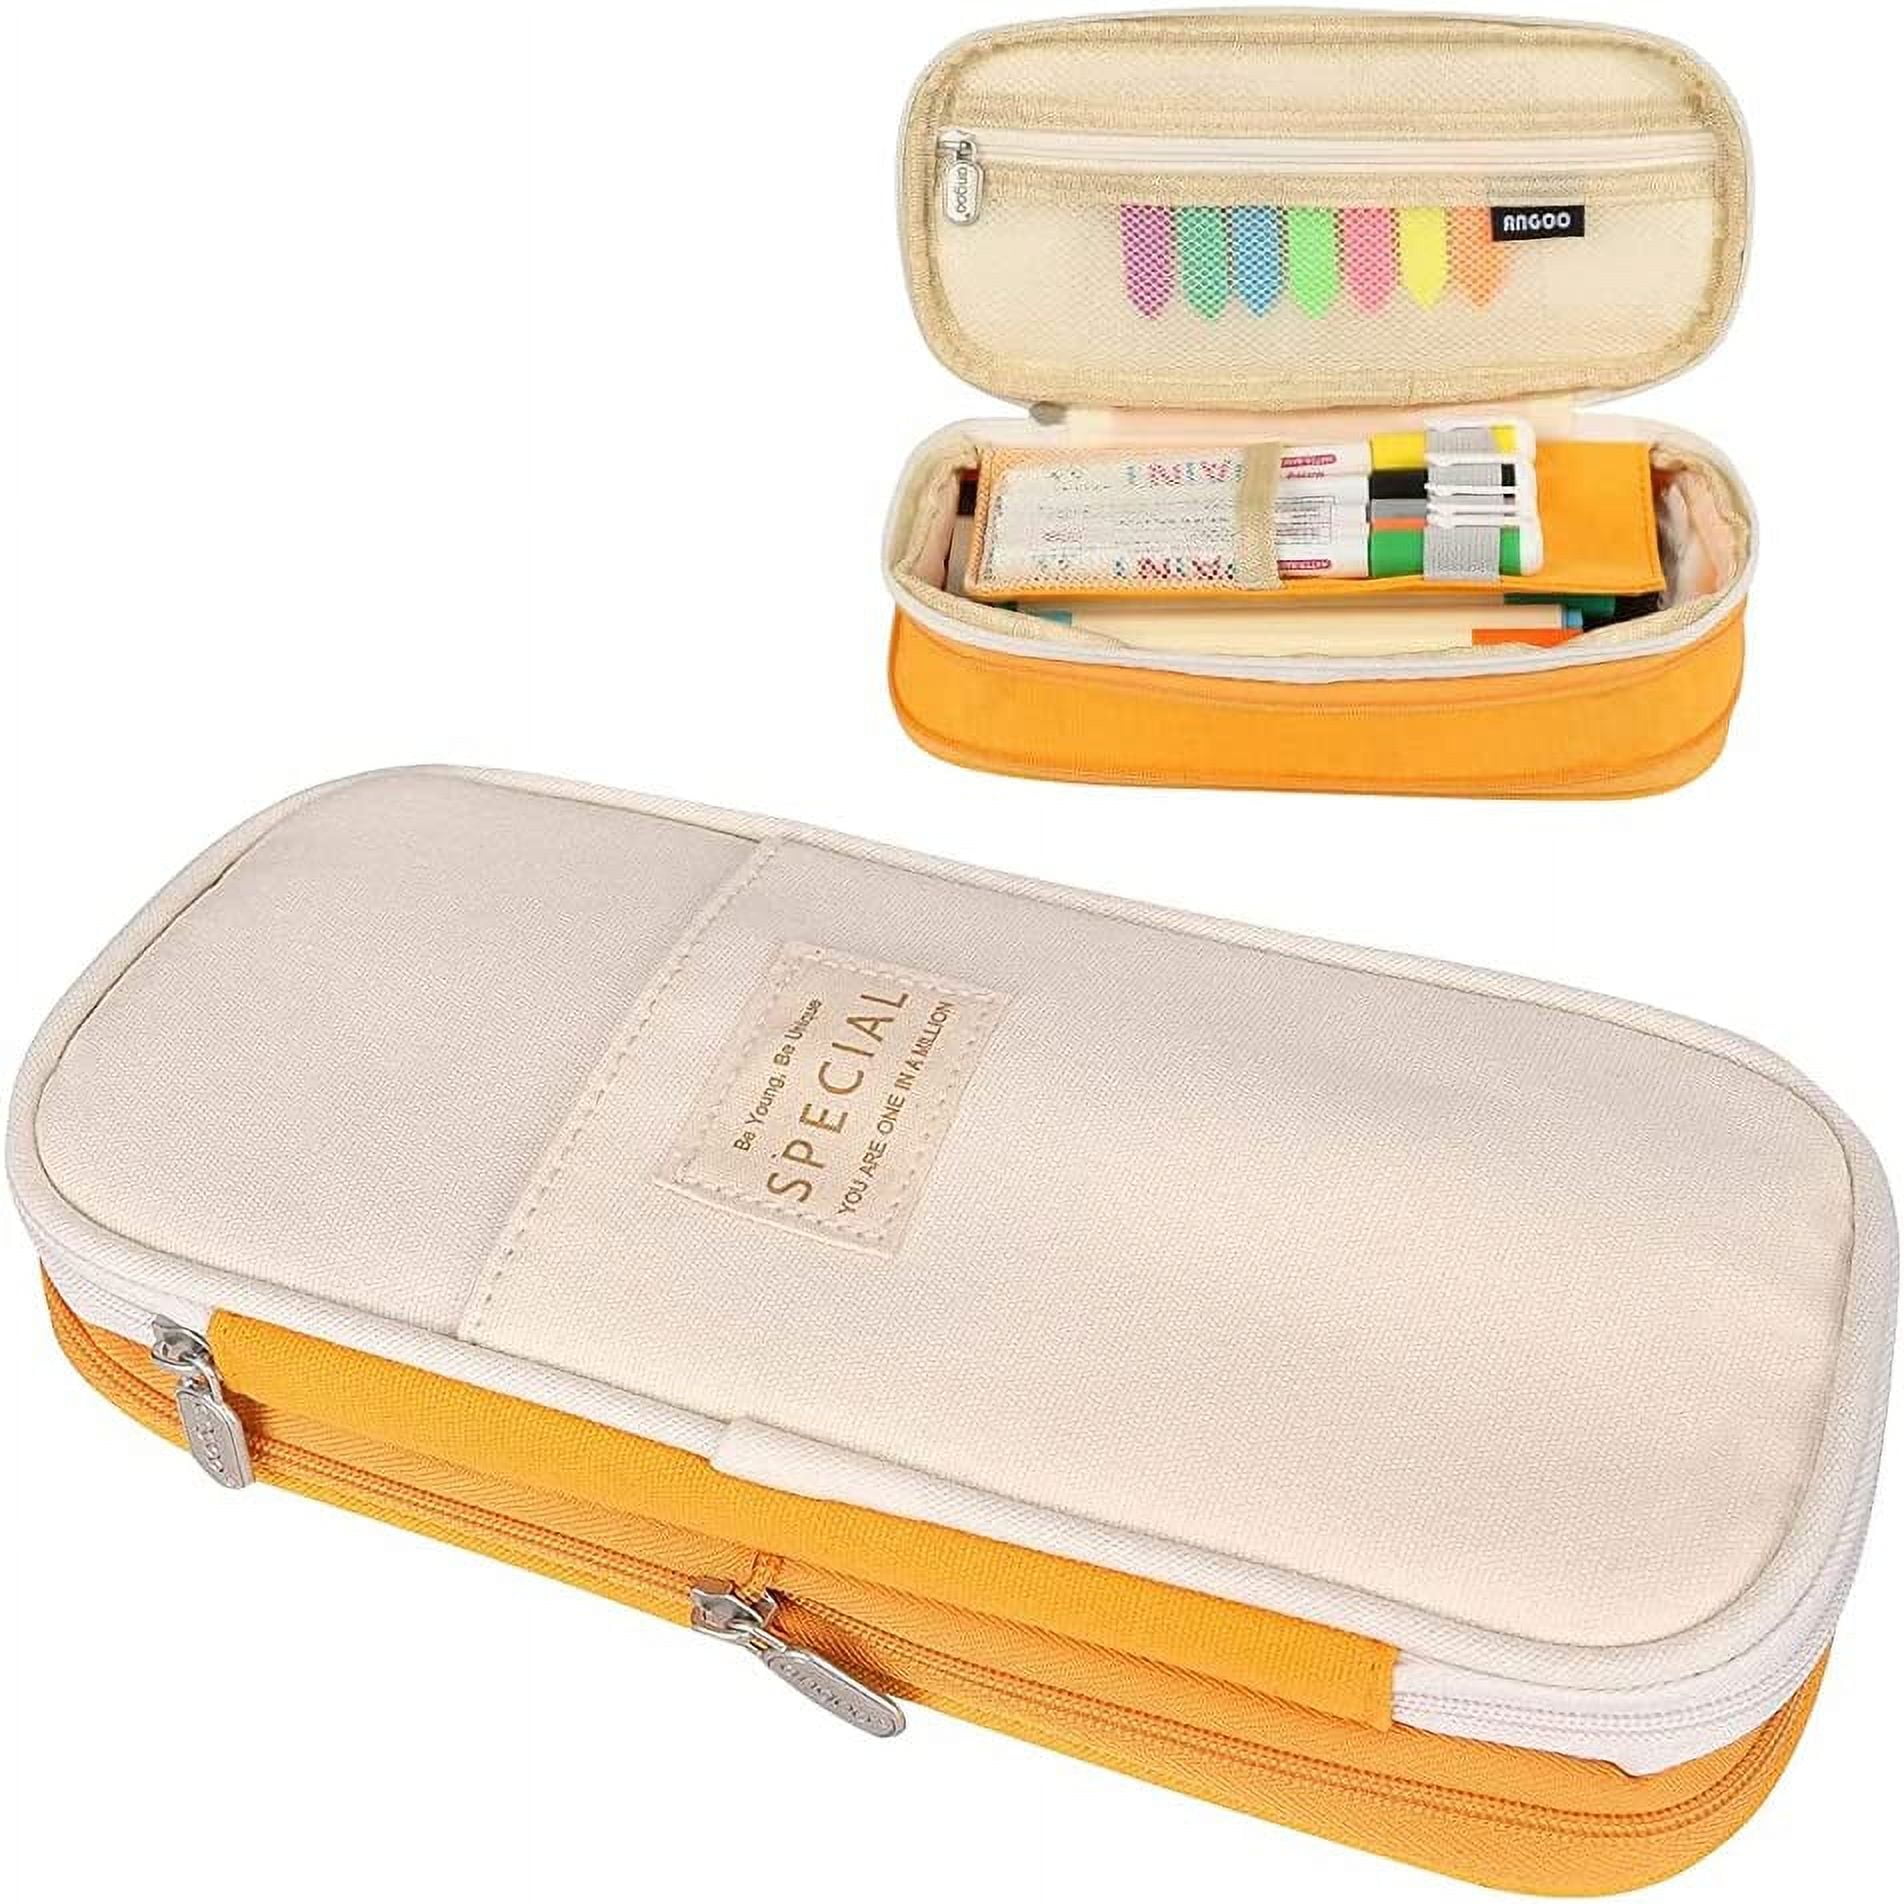  Fmeida Large Pencil Case Aesthetic - Yellow Pencil Pouch  Portable Pencil Bag Simple Pencil Storage Bag Pen Holder Marker Organizer  Fabric Zipper Pen Pouch Office Supplies : Arts, Crafts & Sewing